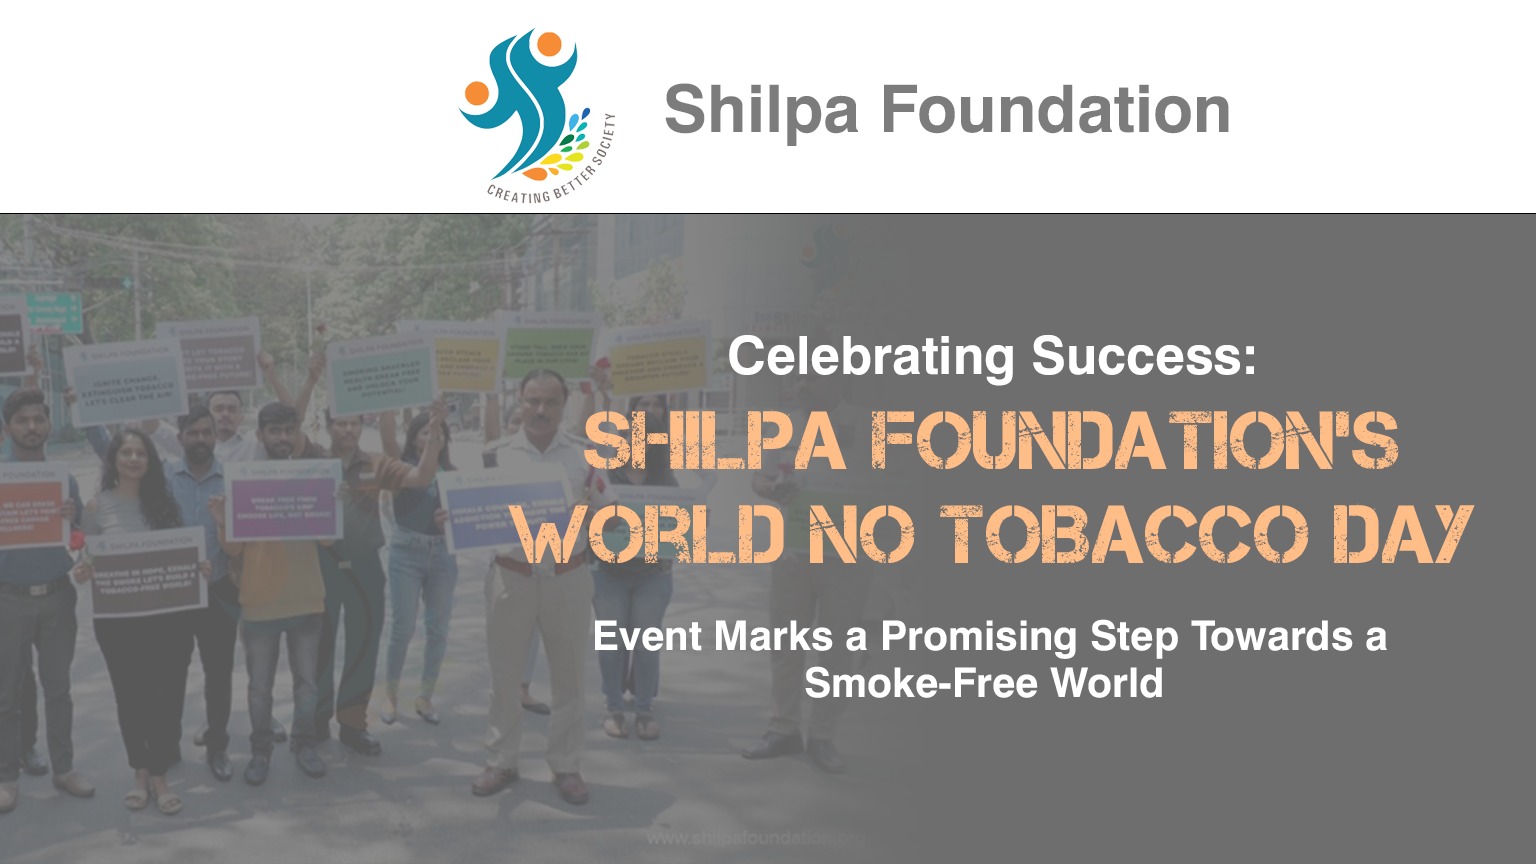 You are currently viewing Celebrating Success: Shilpa Foundation’s World No Tobacco DayEvent Marks a Promising Step Towards a Smoke-Free World